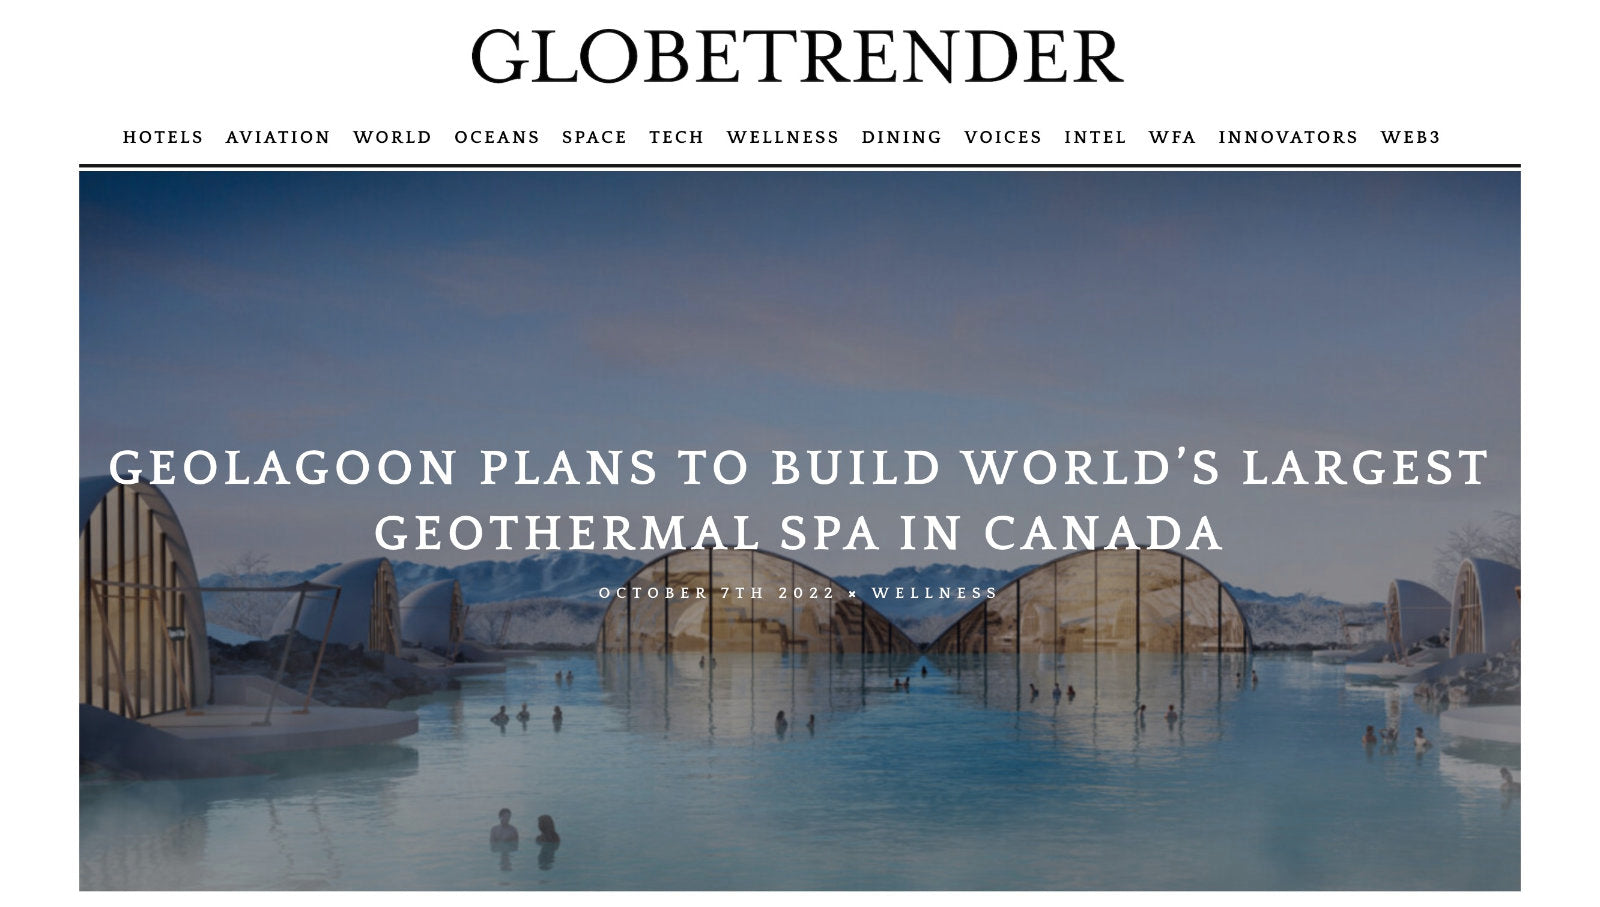 [EN] GEOLAGOON PLANS TO BUILD WORLD’S LARGEST GEOTHERMAL SPA IN CANADA